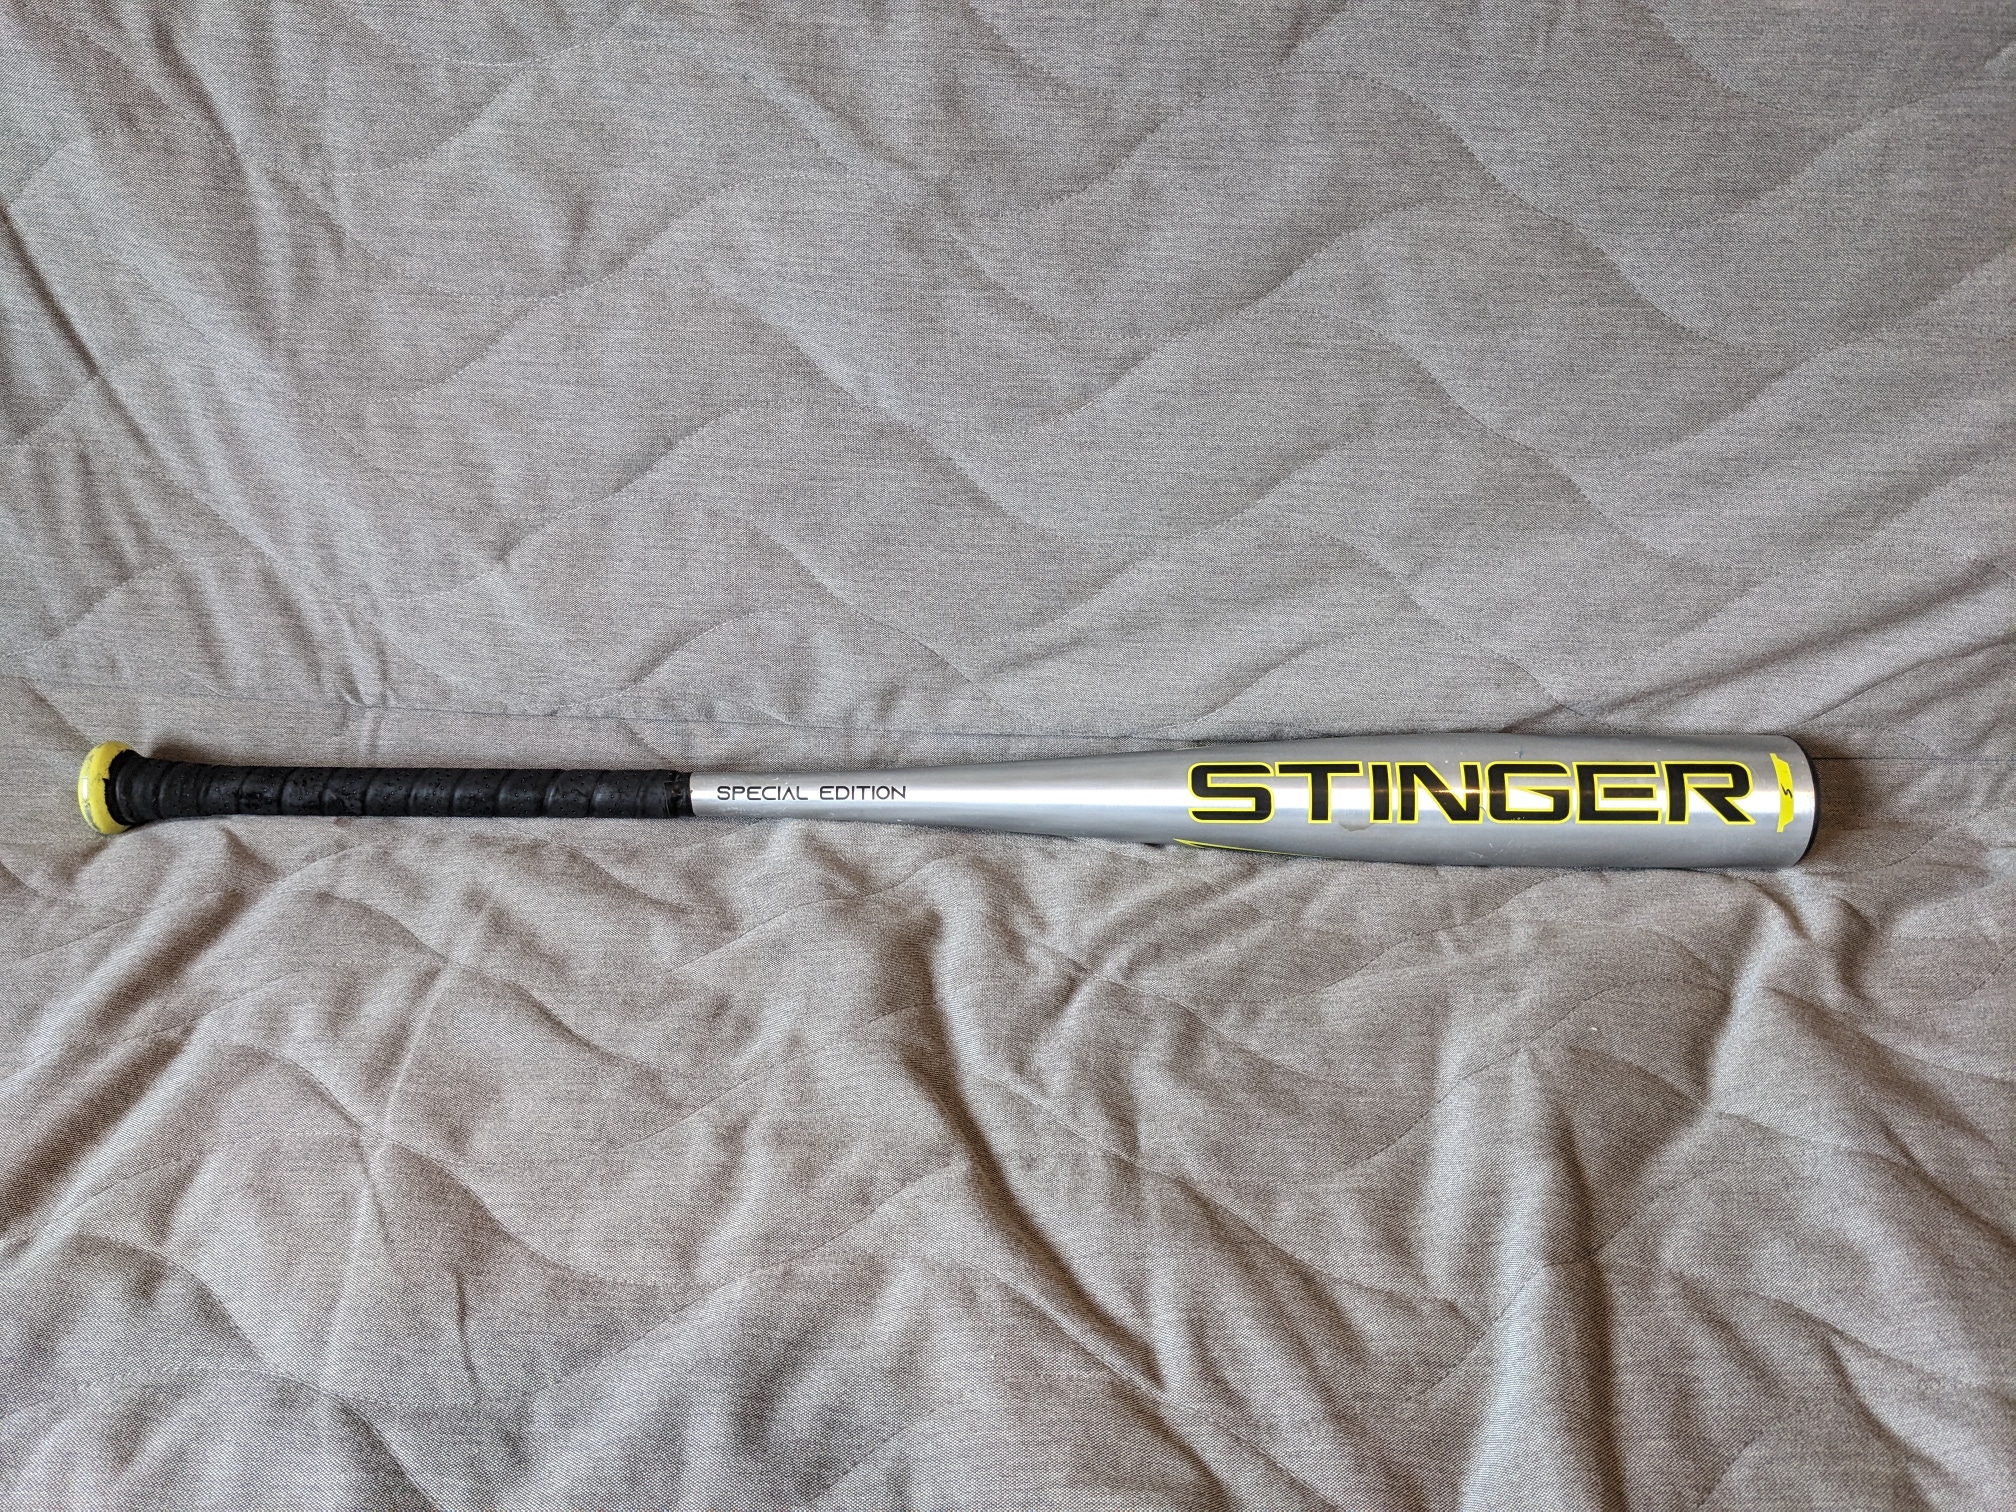 Used BBCOR Certified Stinger Nuke Bat (-3) 30 oz 33" Special Edition